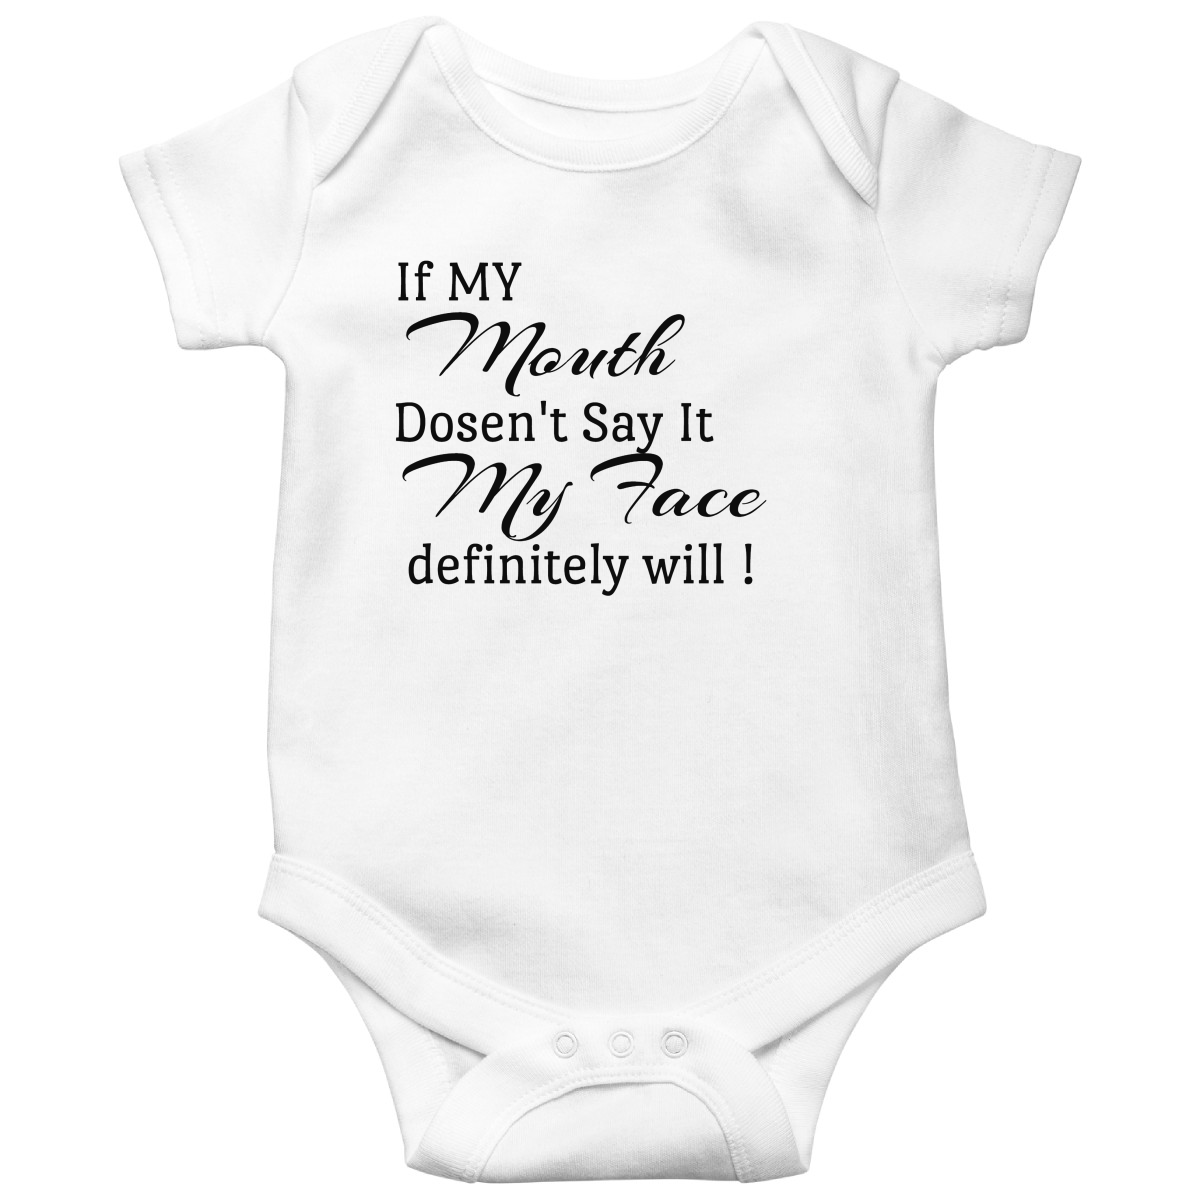 If My Mouth Doesn't Say It My Face Definitely Will  Baby Bodysuits | White